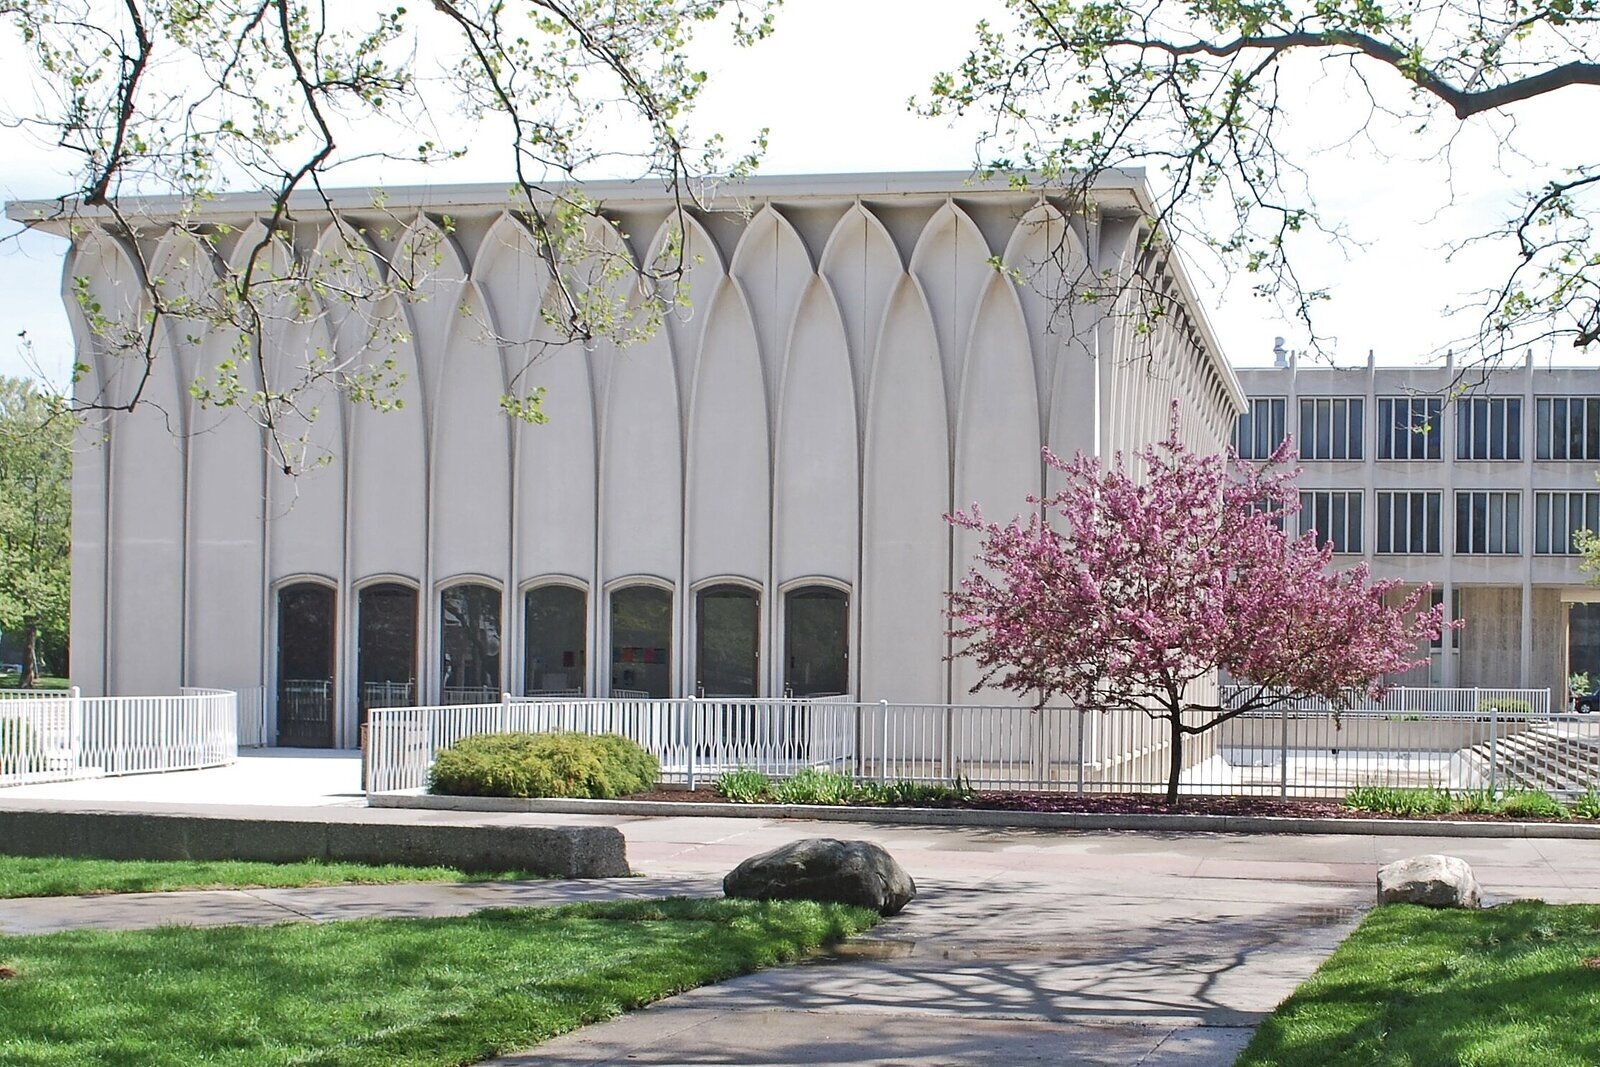 The Helen L. DeRoy Auditorium on the campus of Wayne State University and its surrounding reflection pool, seen here empty to the right of the building's foundation.